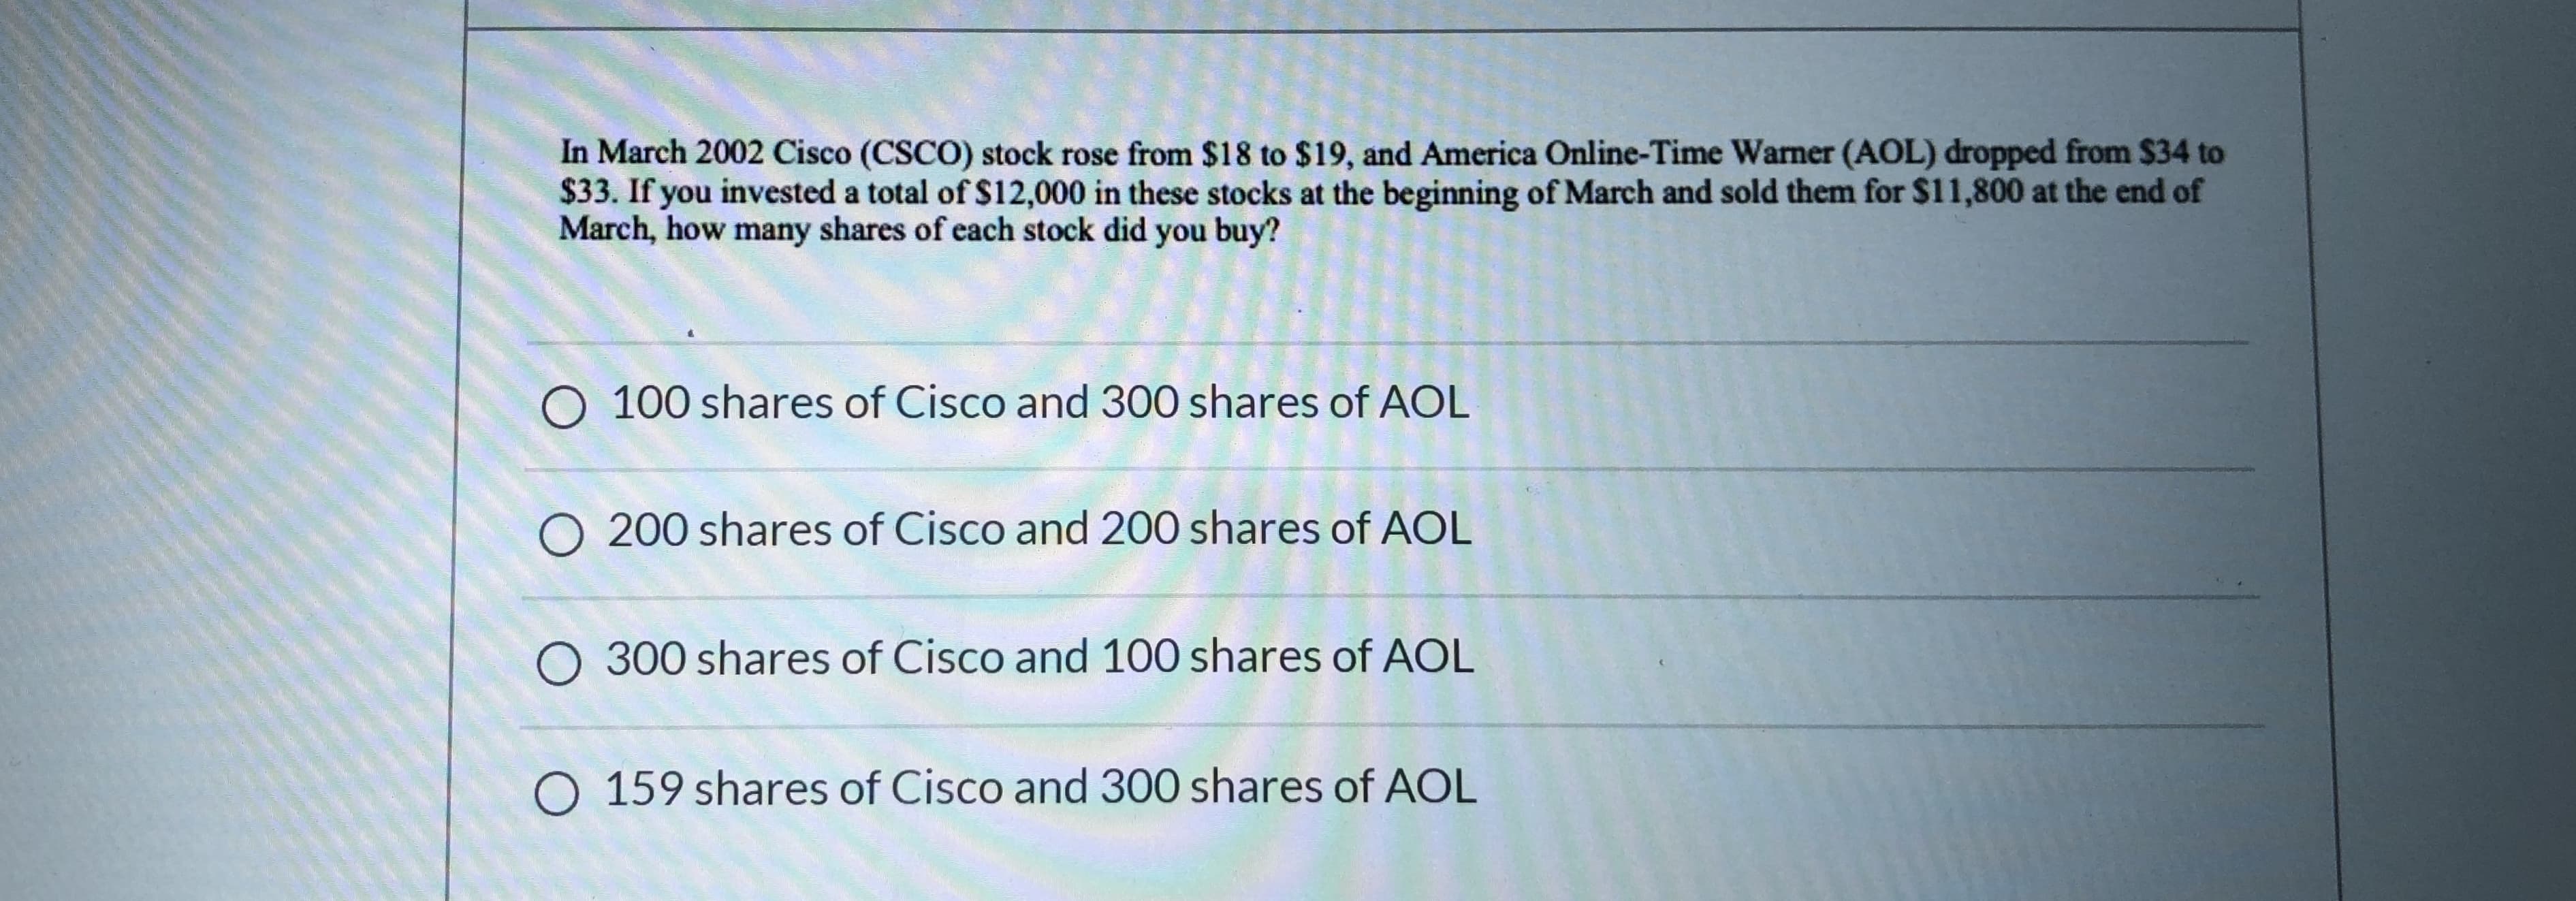 In March 2002 Cisco (CSCO) stock rose from $18 to $19, and America Online-Time Wamer (AOL) dropped from $34 to
$33. If you invested a total of $12,000 in these stocks at the beginning of March and sold them for $11,800 at the end of
March, how many shares of each stock did you buy?
